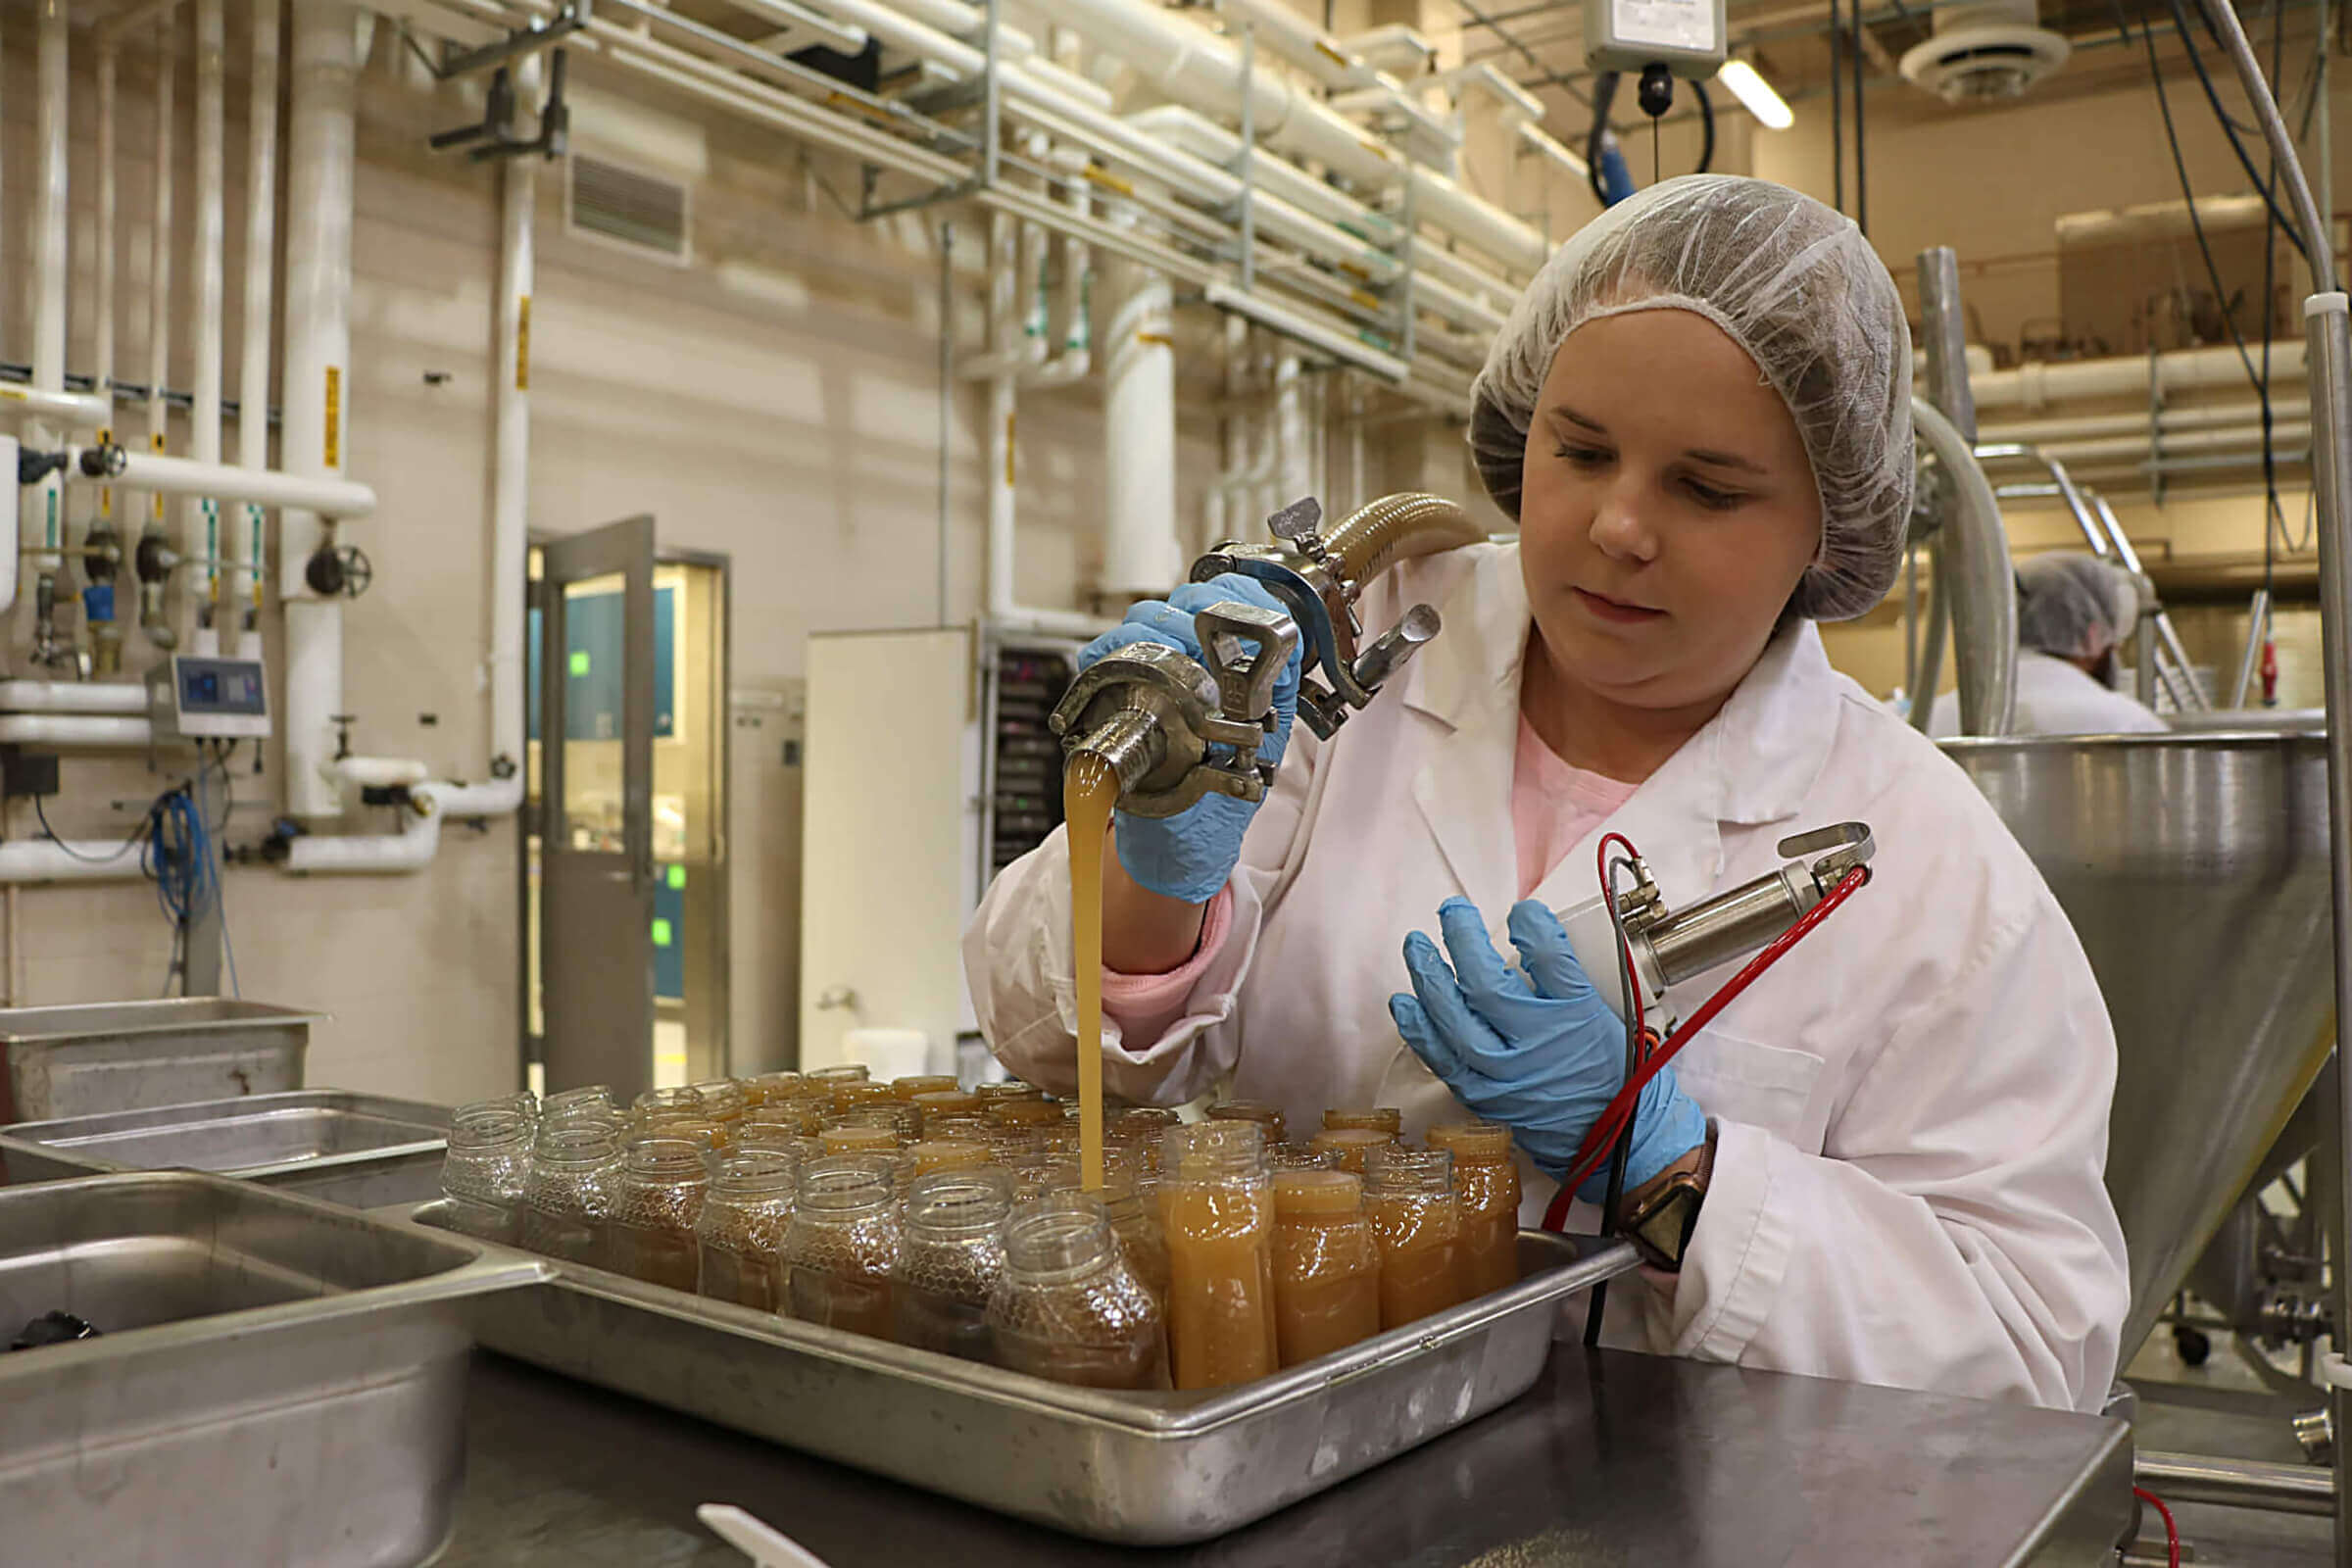 Alyson McGovern, a sophomore in the Department of Food Science, works on filling bottles with honey in the Pilot Lab. (Photo by Tim Thompson.)